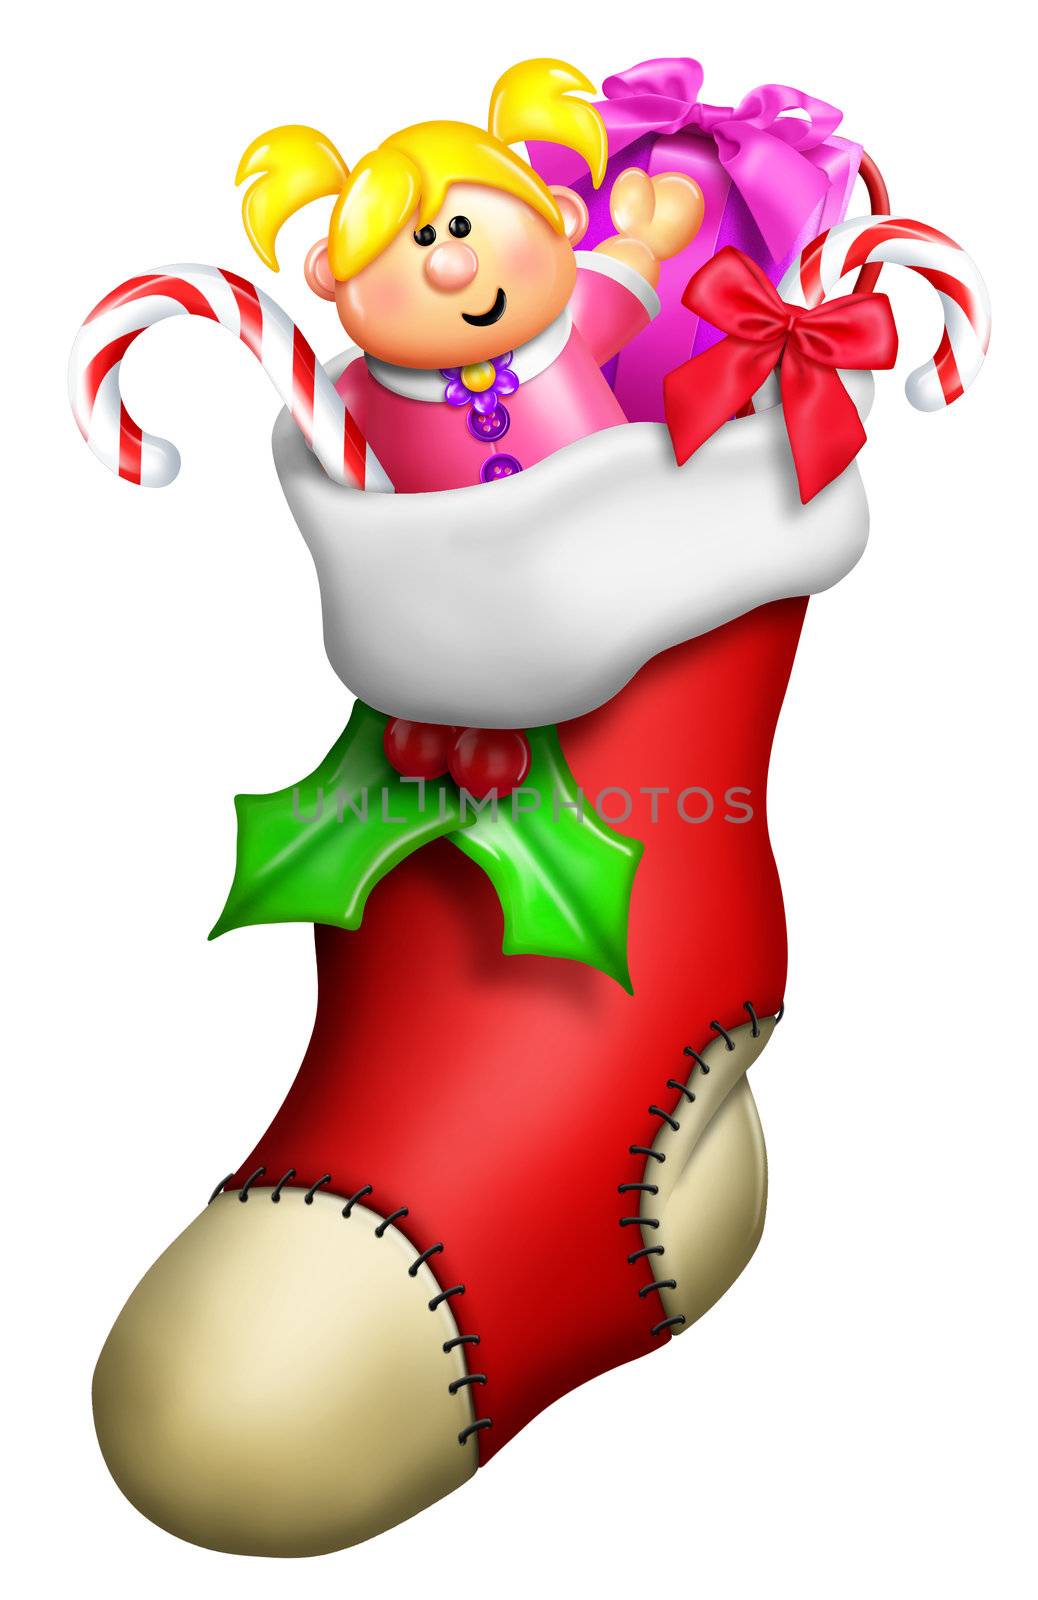 Cartoon Christmas Stocking for Girl with Toys by komodoempire